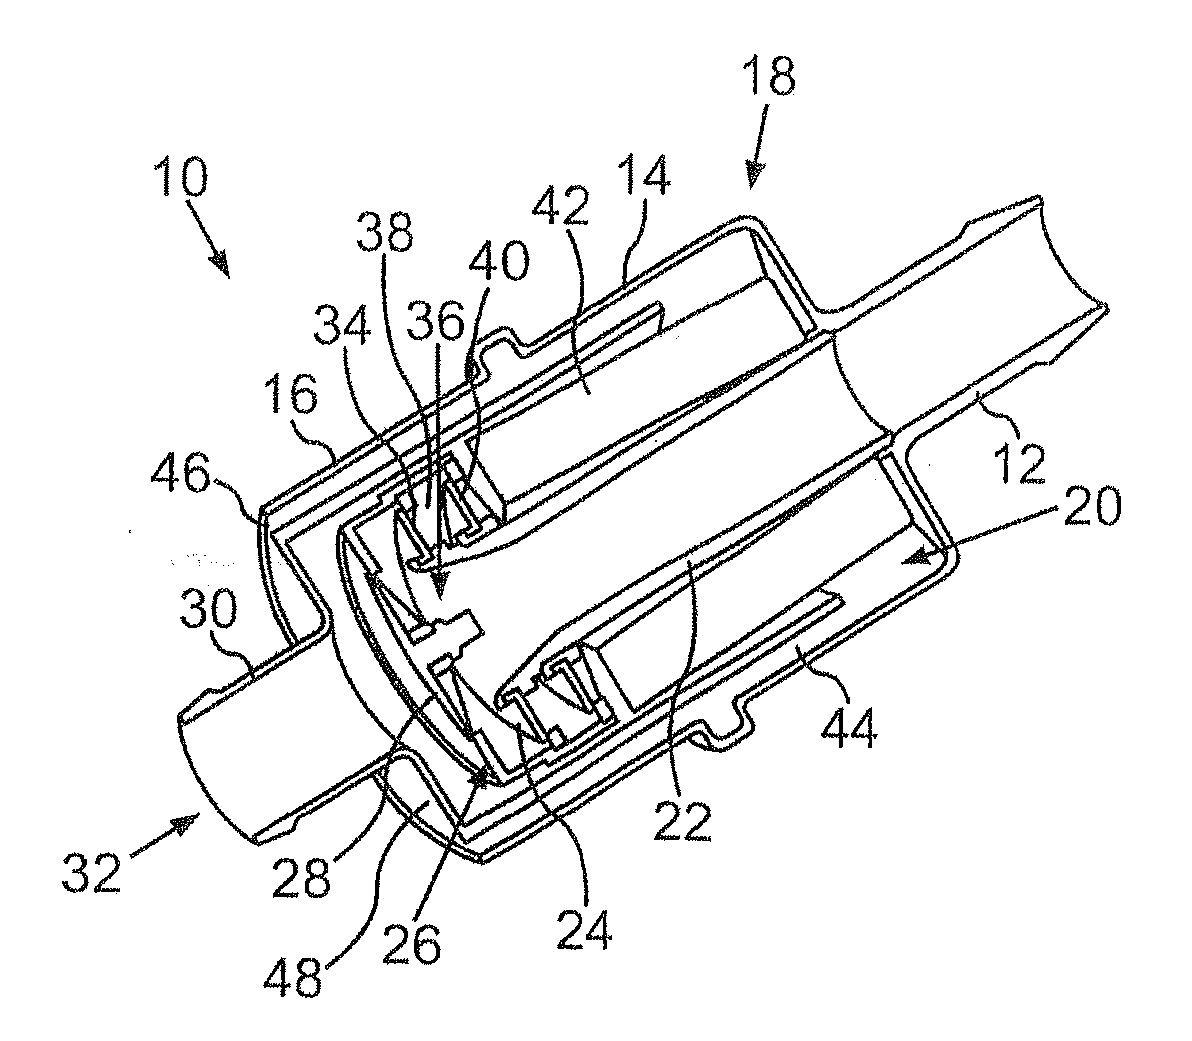 Device for Aeration and Ventilation of a Fuel System